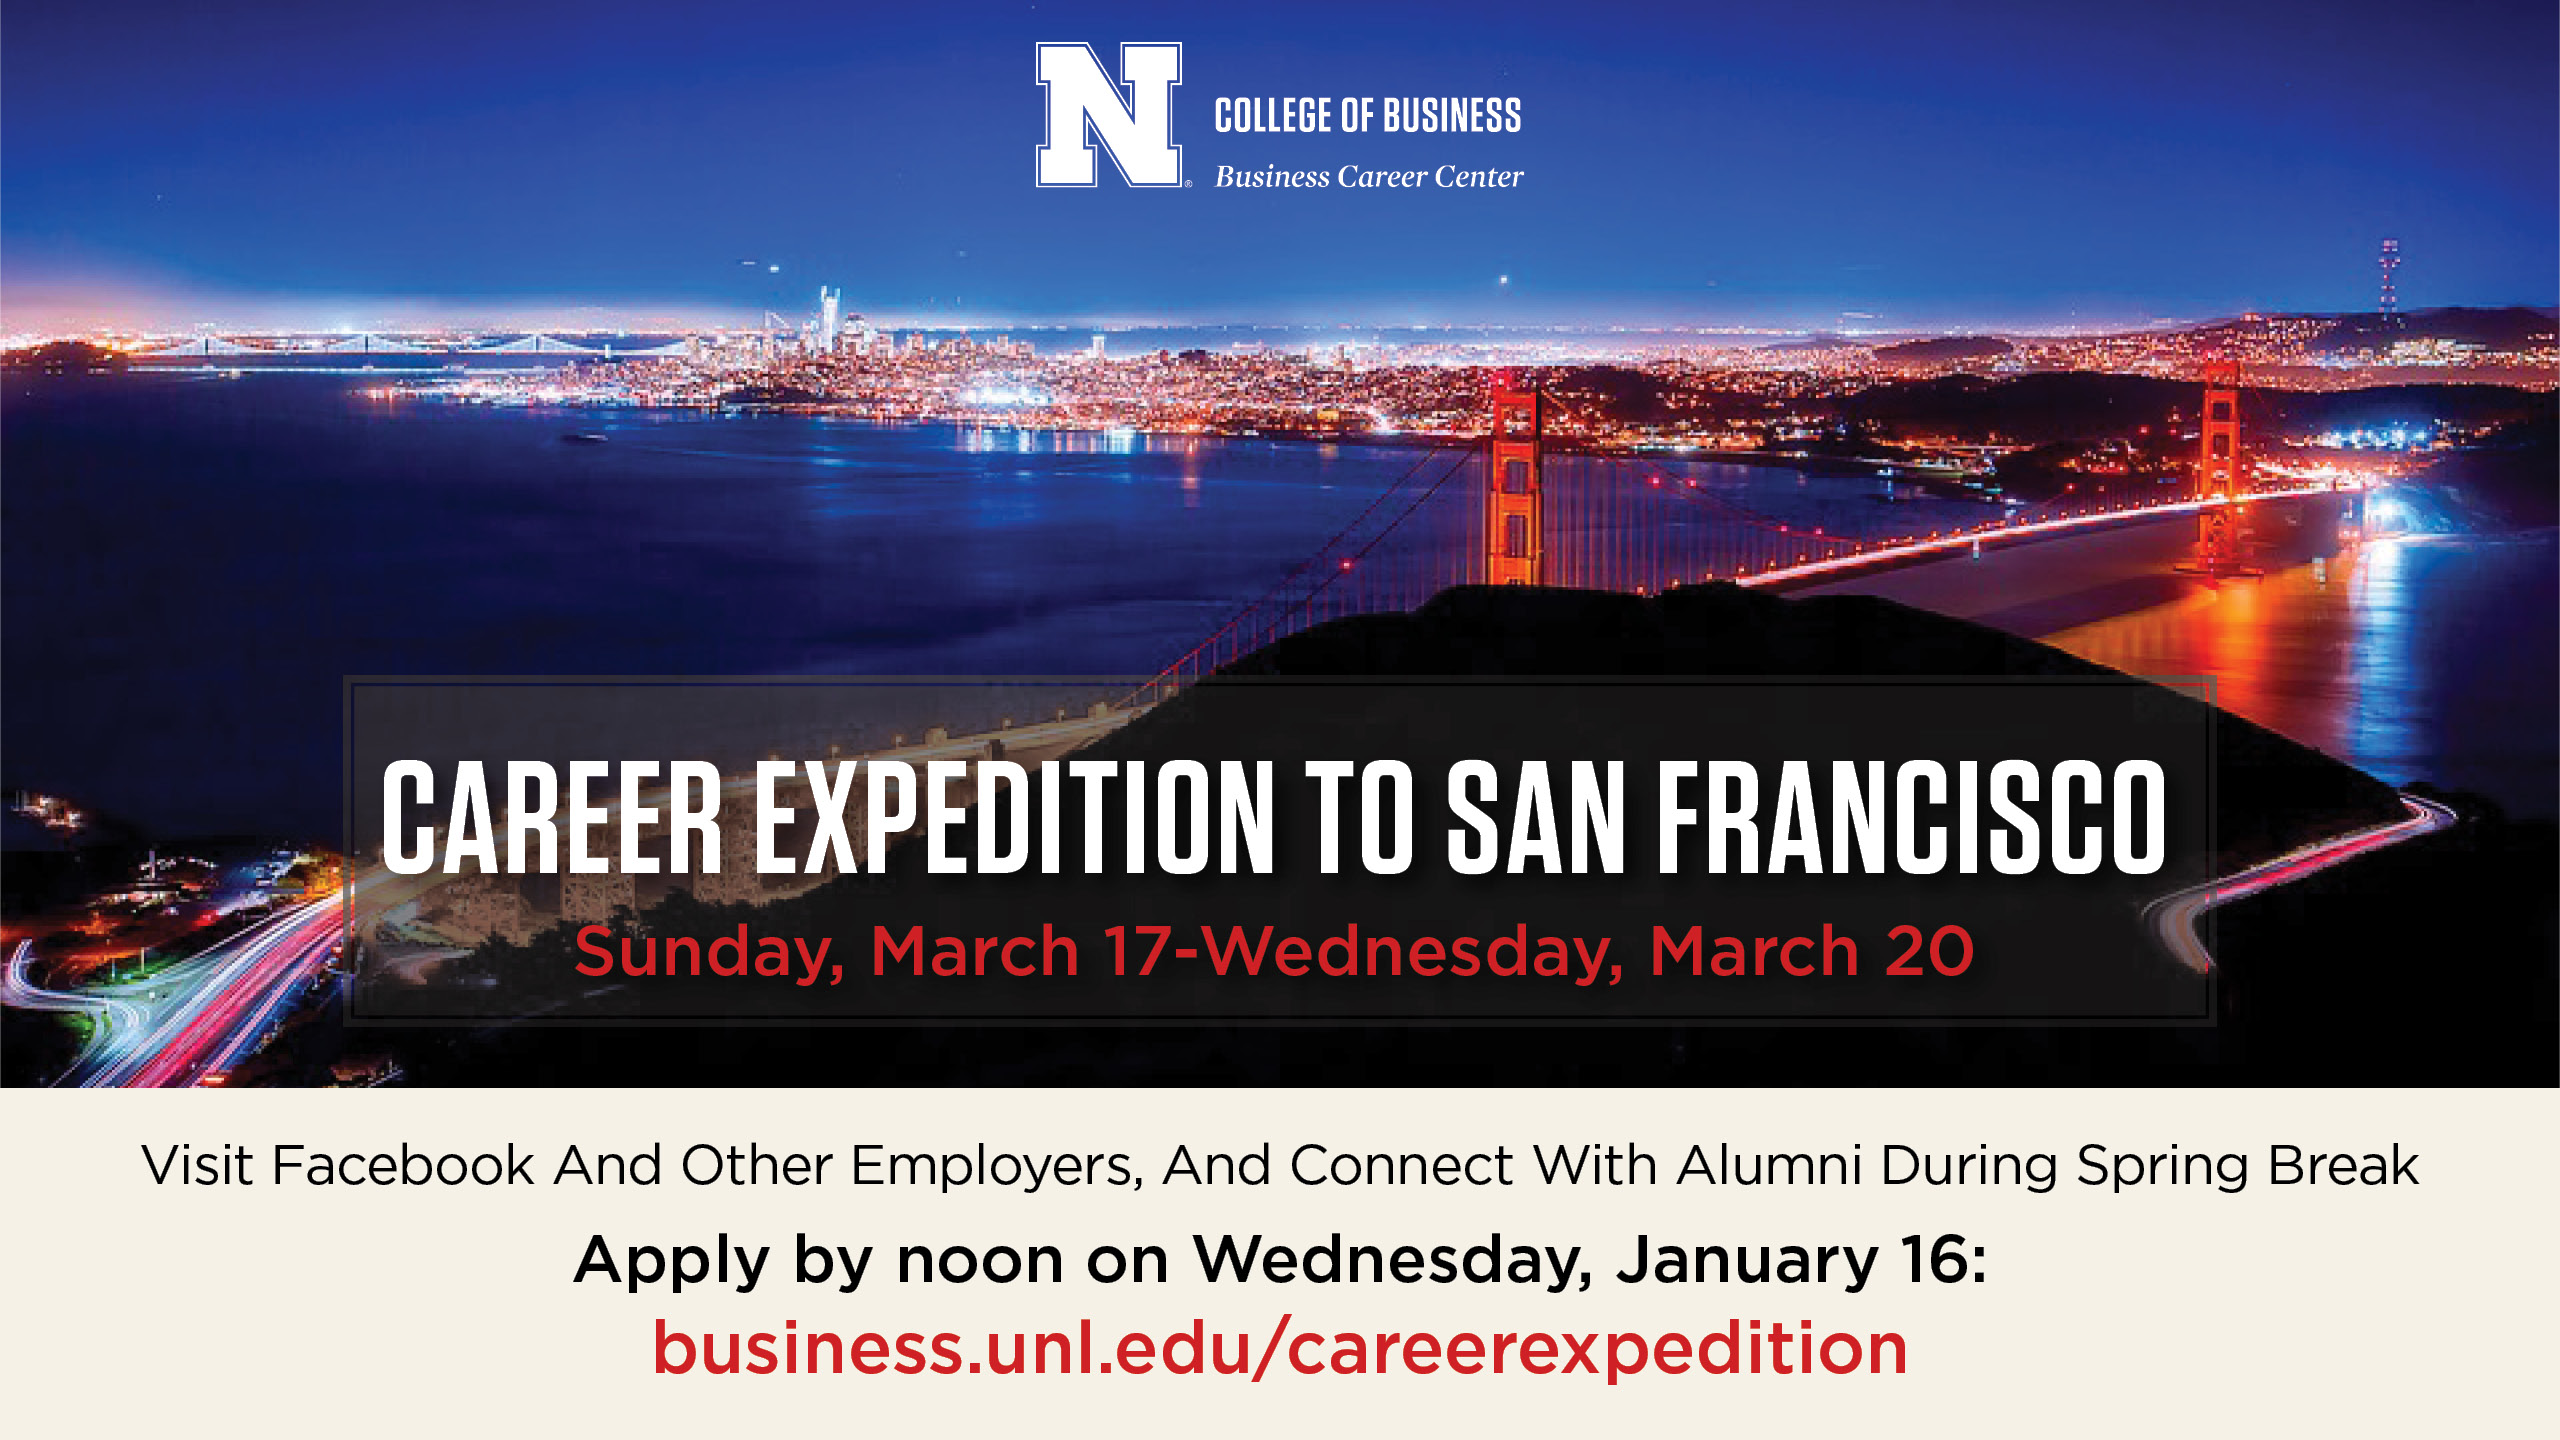 Career expedition